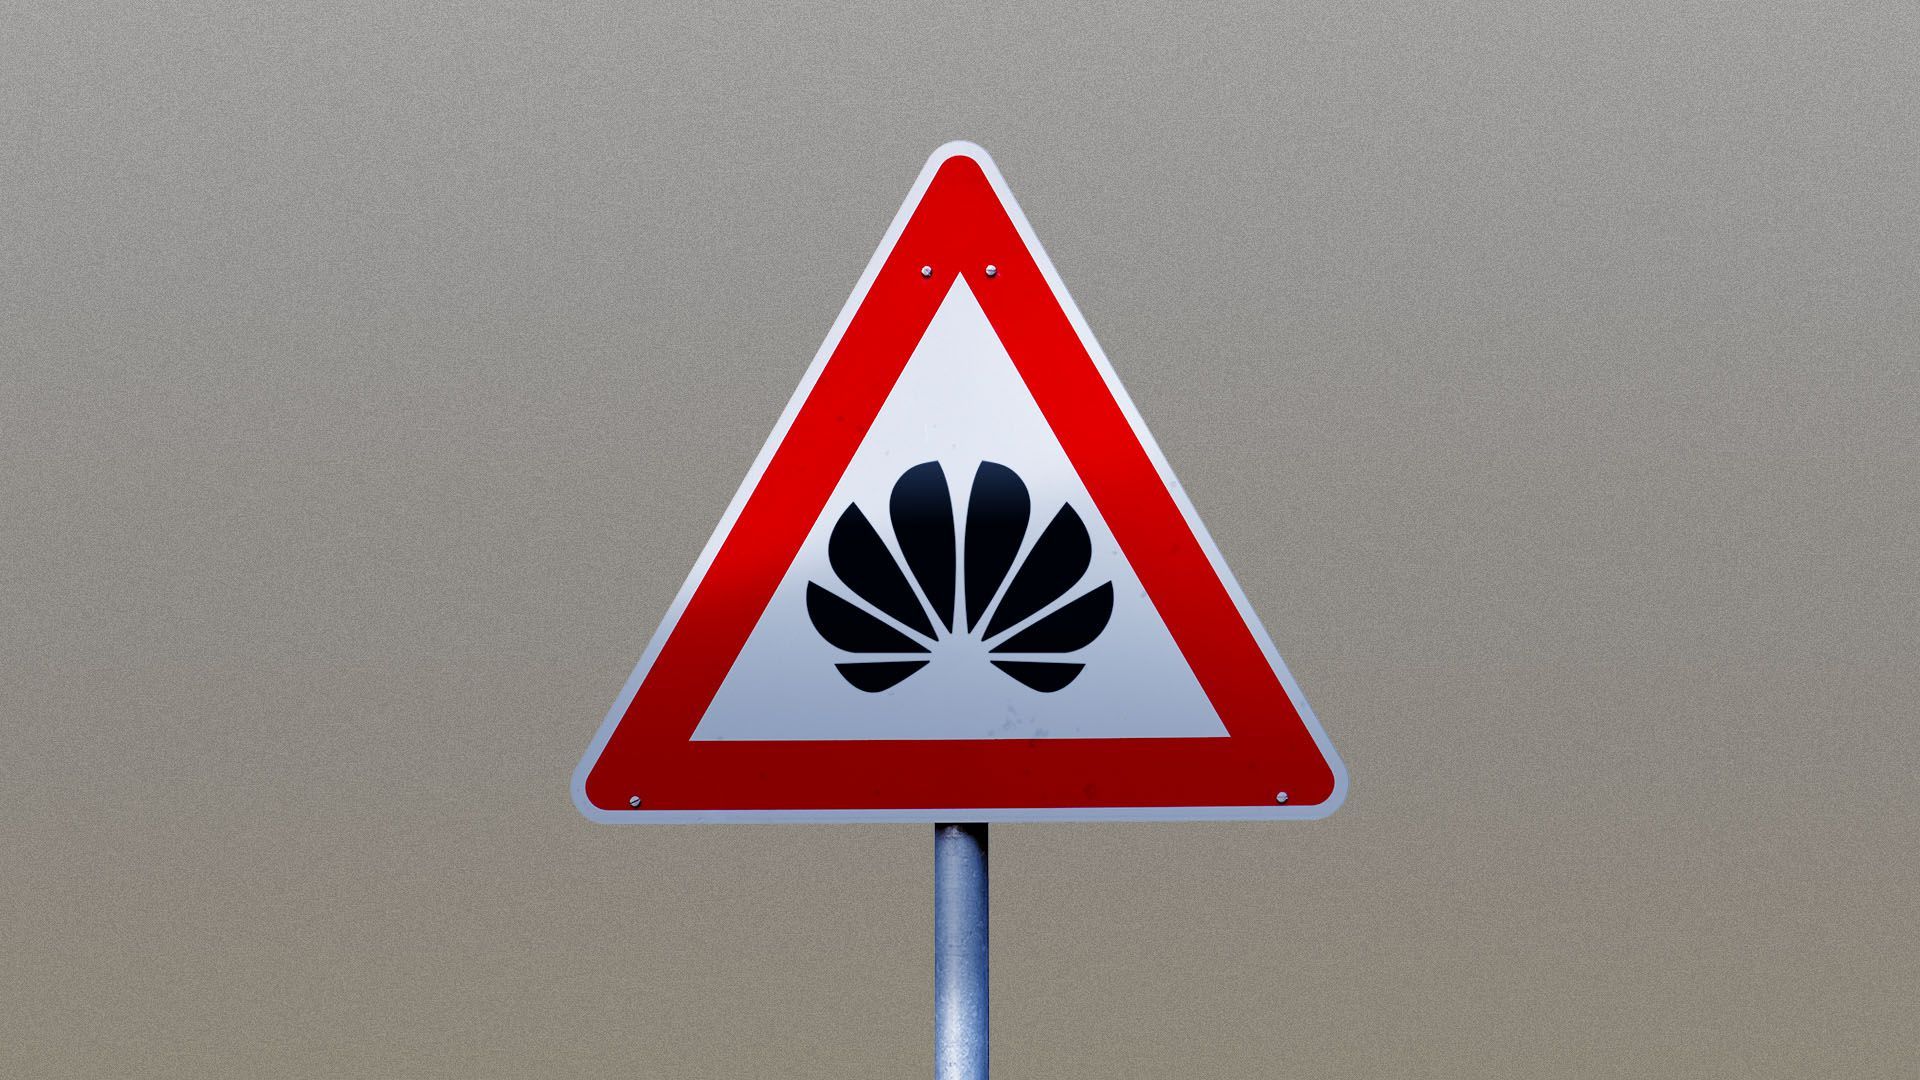 Illustration of a warning sign featuring the Huawei logo